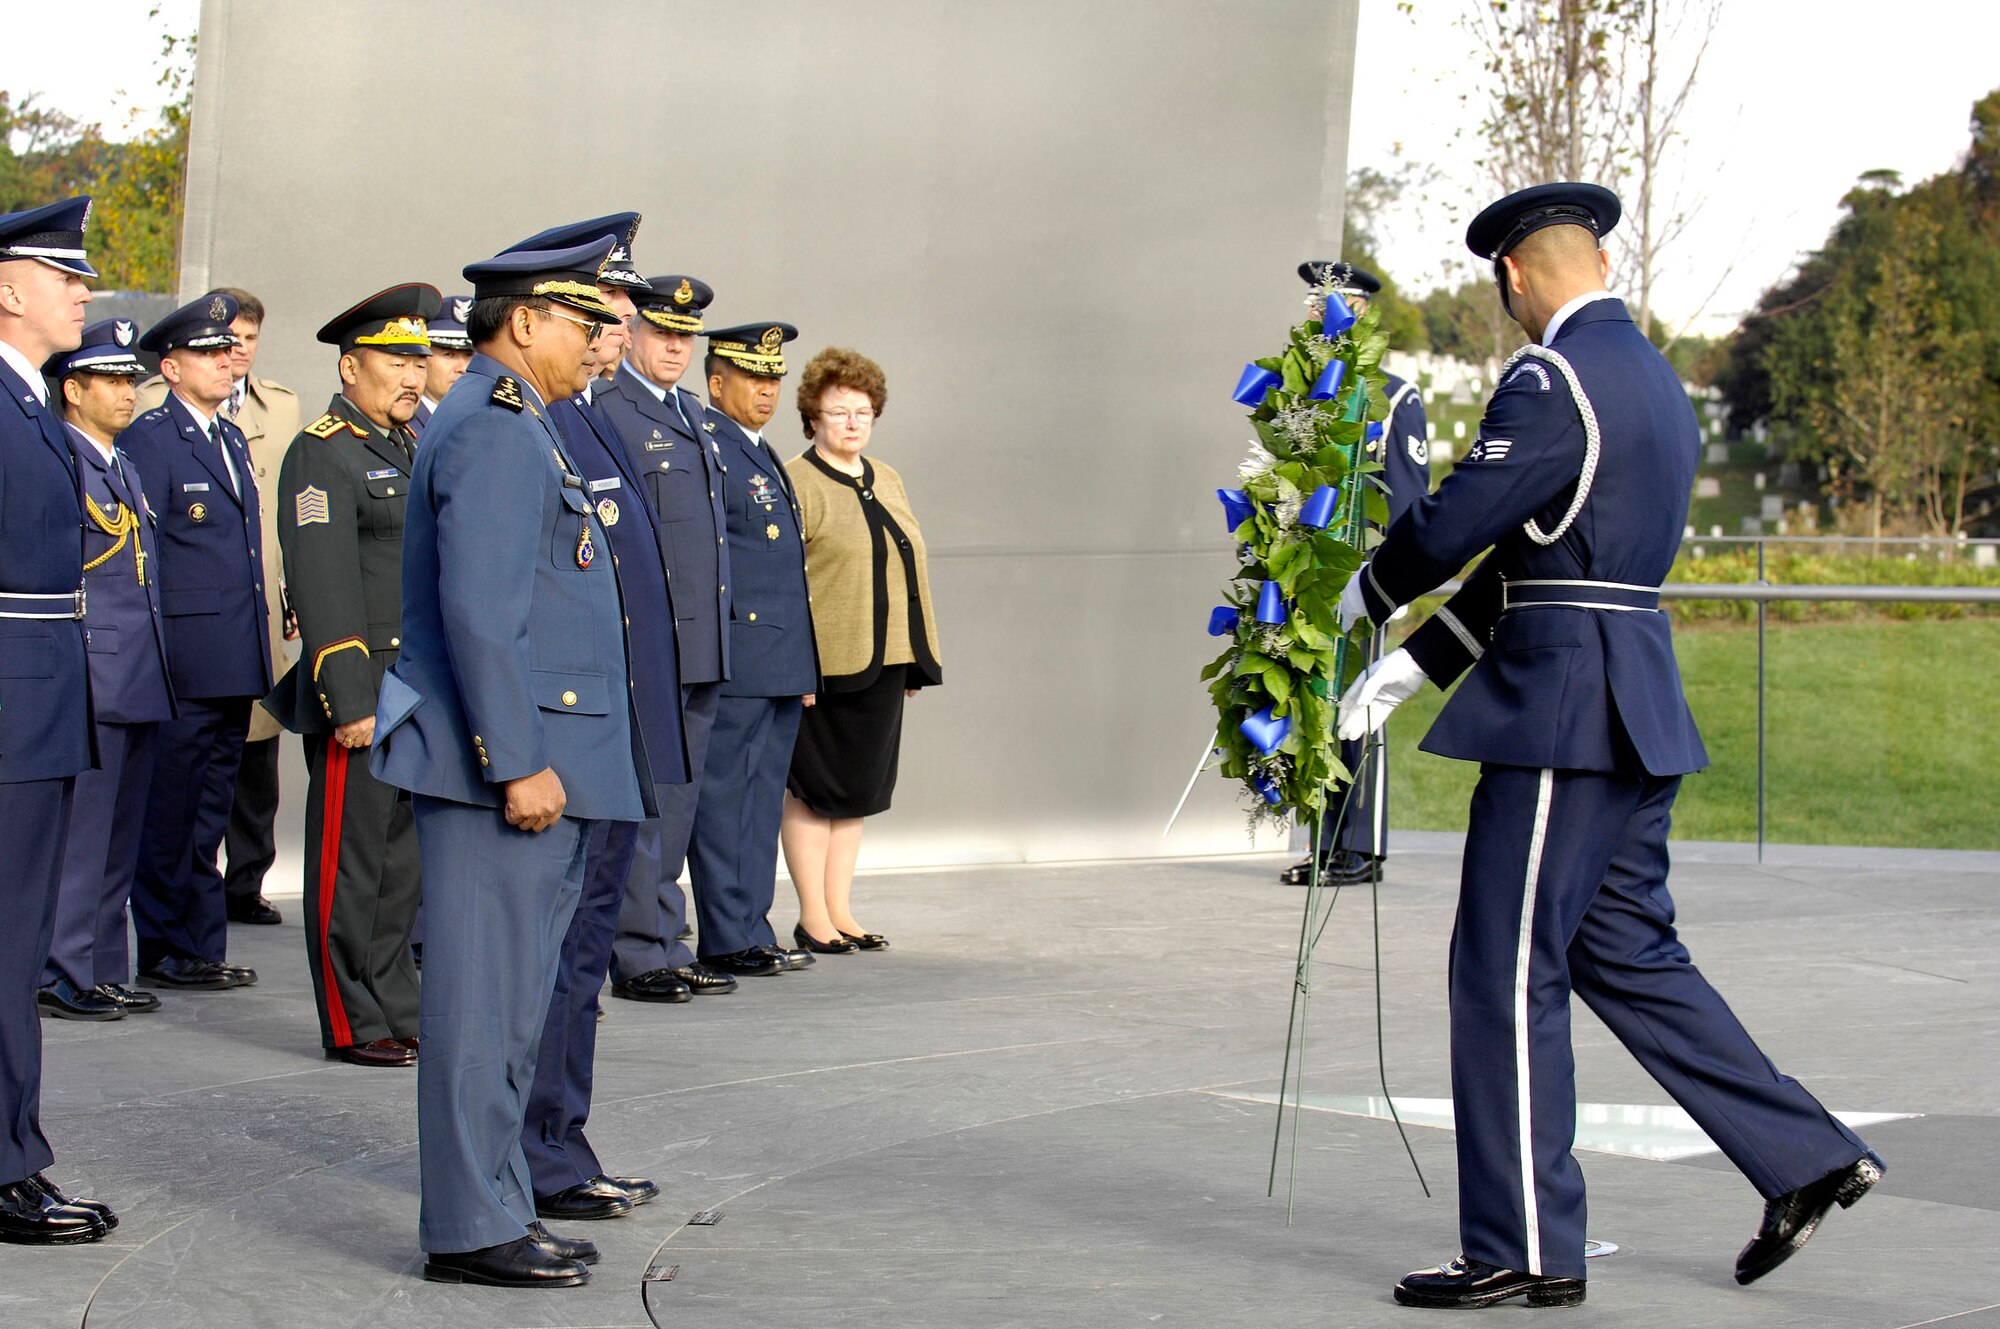 An Airman from the U.S. Air Force Honor Guard presents the wreath at the foreign dignitary arrival and wreath laying ceremony at the Air Force Memorial in Arlington, Va., on Oct. 24.  Air Force Chief of Staff Gen. T. Michael Moseley hosted the ceremony for nine Pacific air chiefs visiting Washington. Lt. Gen. Soeung Samnang, Cambodian Royal Air Force commander, represented the Pacific Air Chiefs  when he assisted Gen. Moseley during the ceremony. (U.S. Air Force photo/Senior Airman Desiree Andrejcik) 
